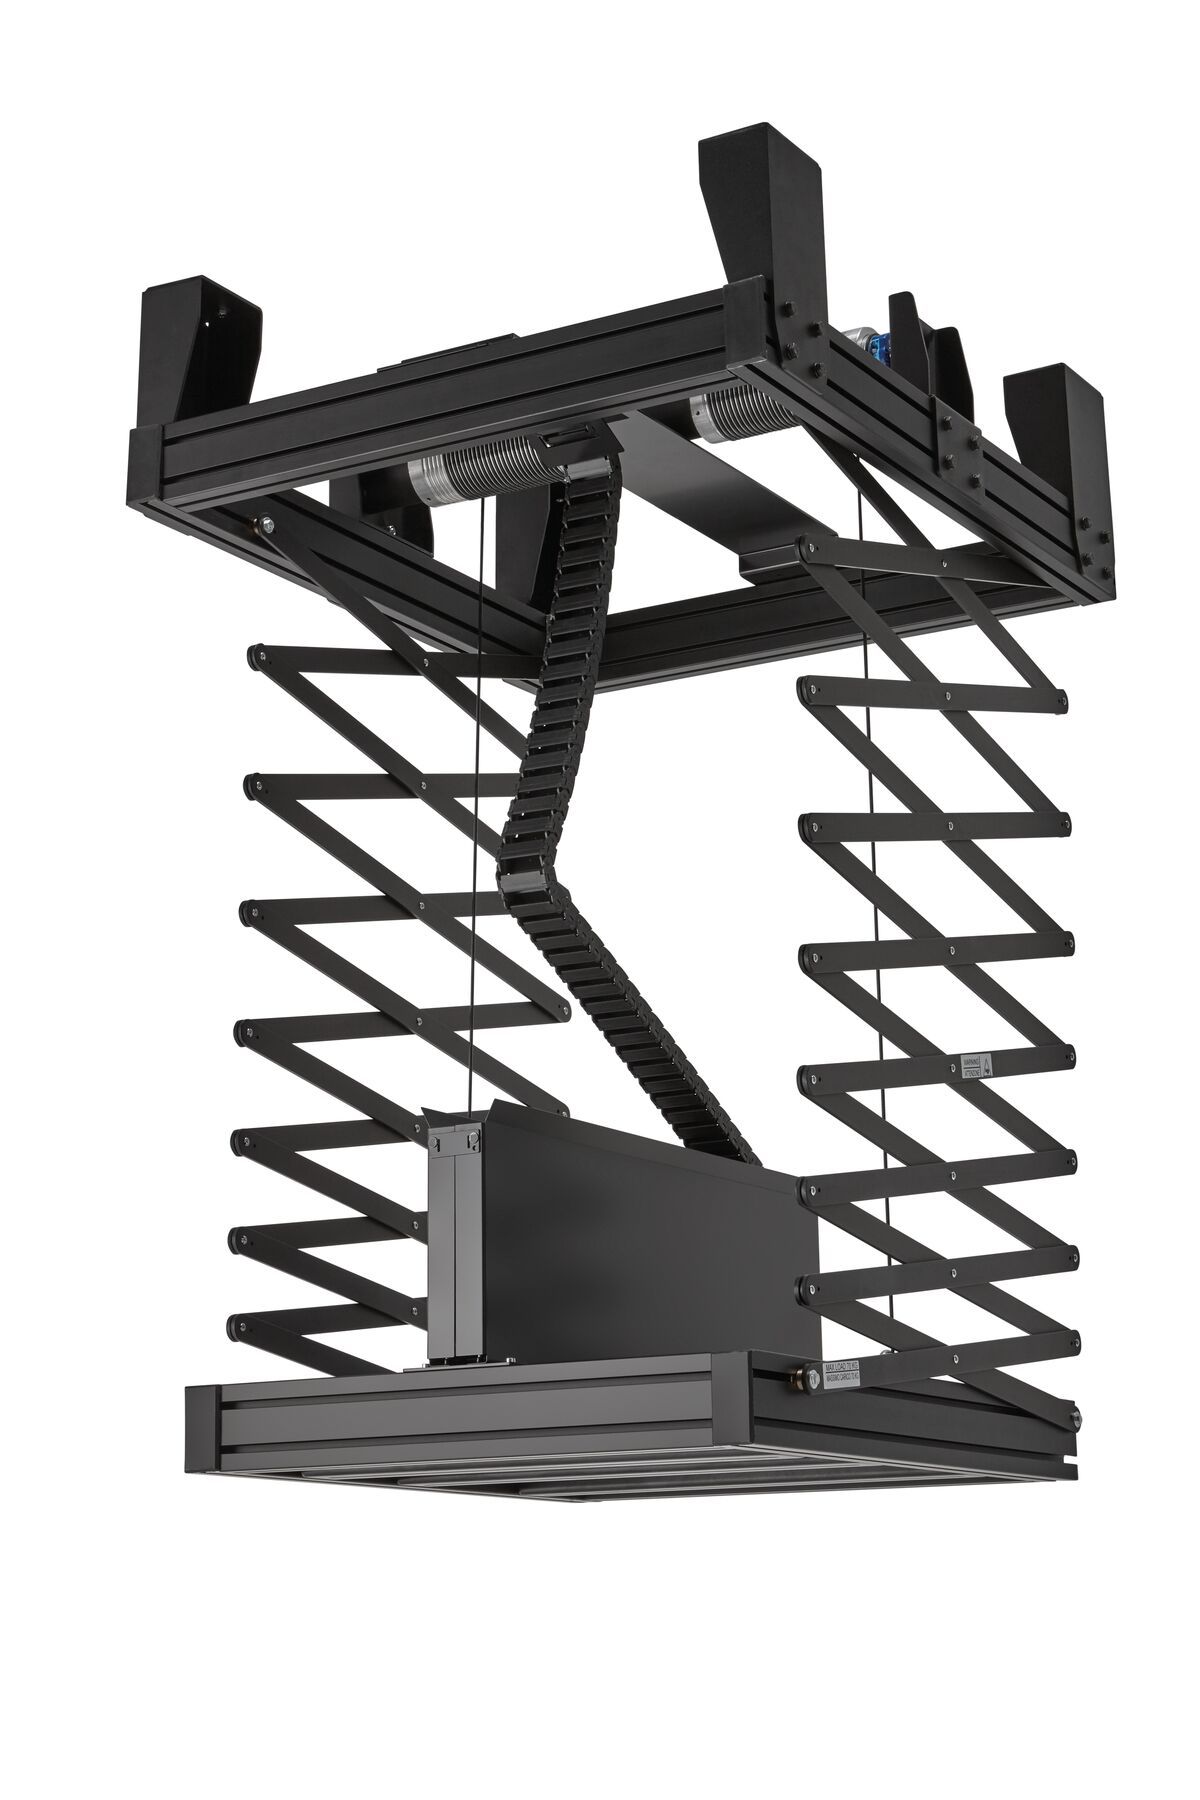 Vogel's PPL 2500 Projector Lift System - Product